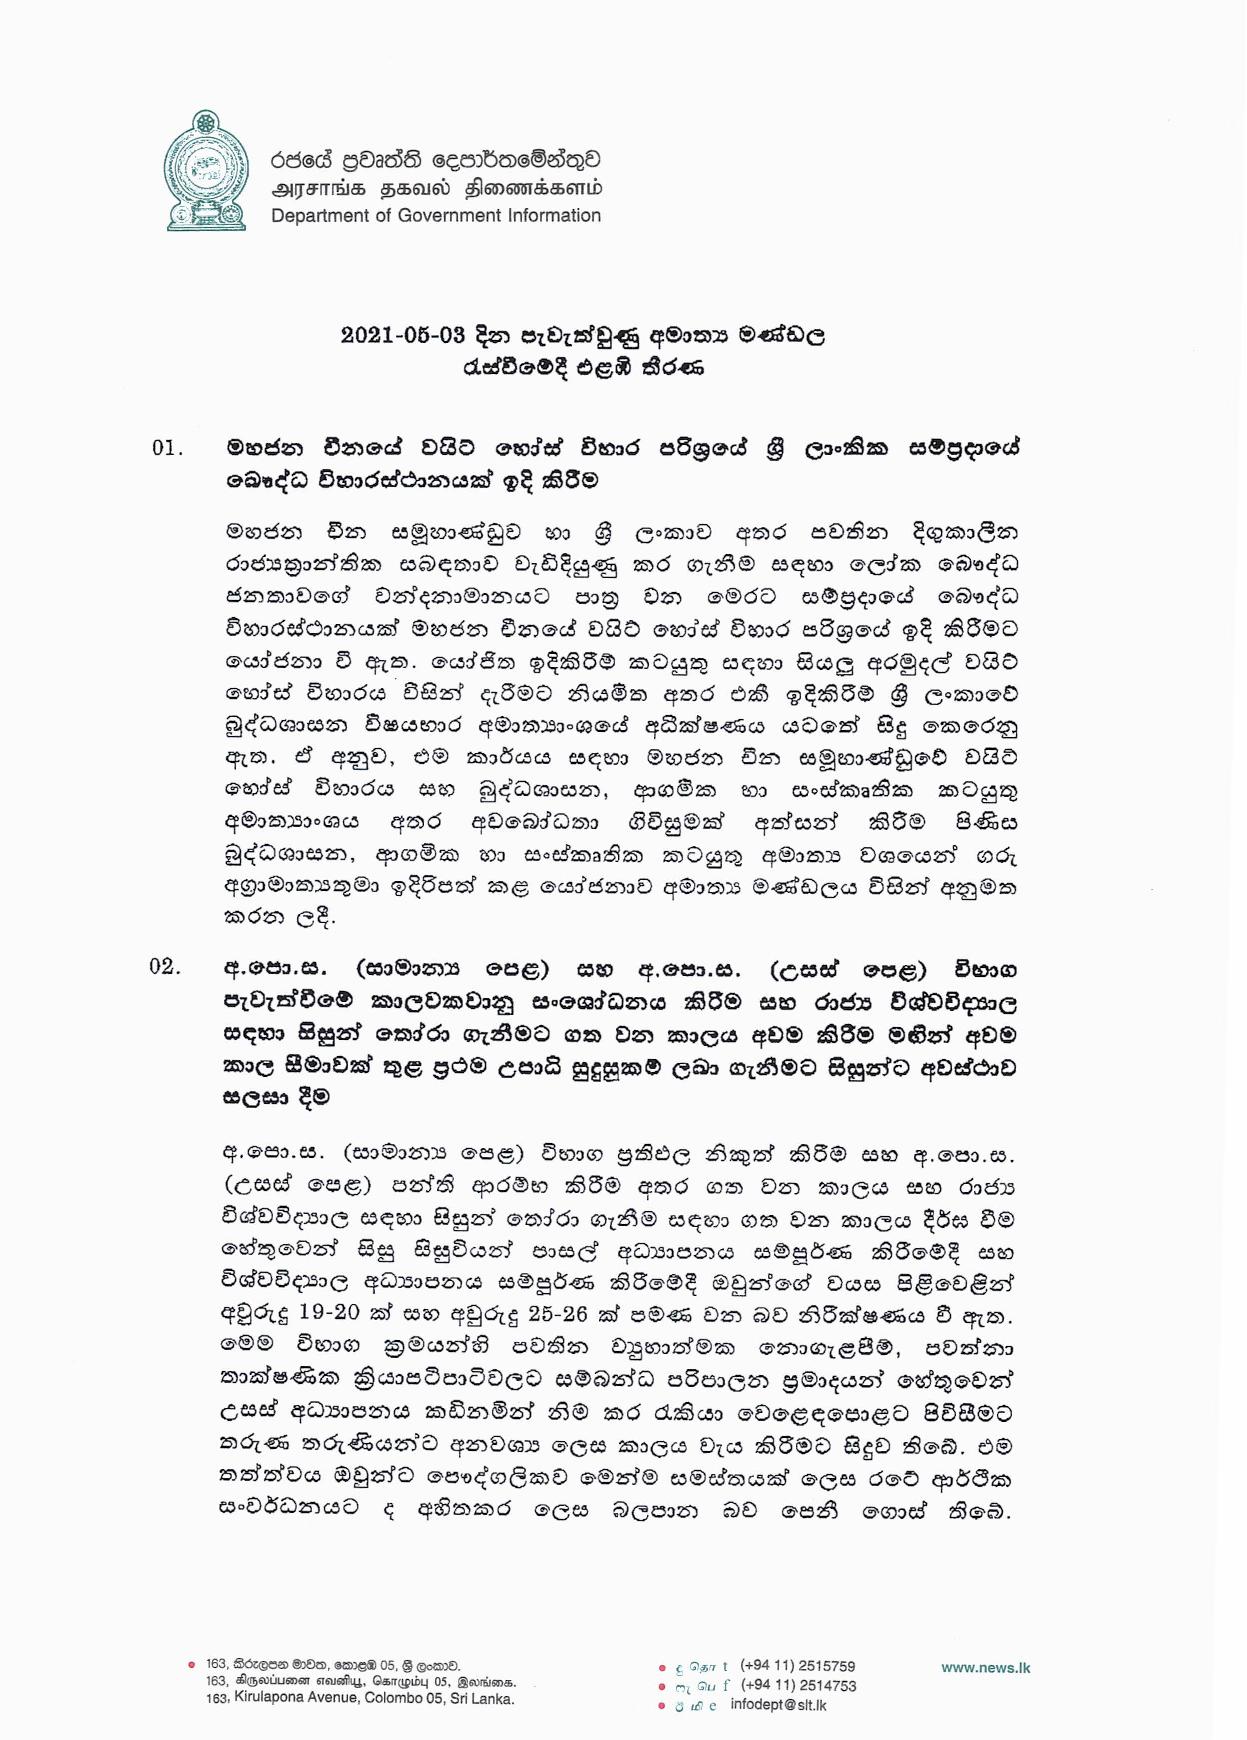 Cabinet Decision on 03.05.2021 page 001